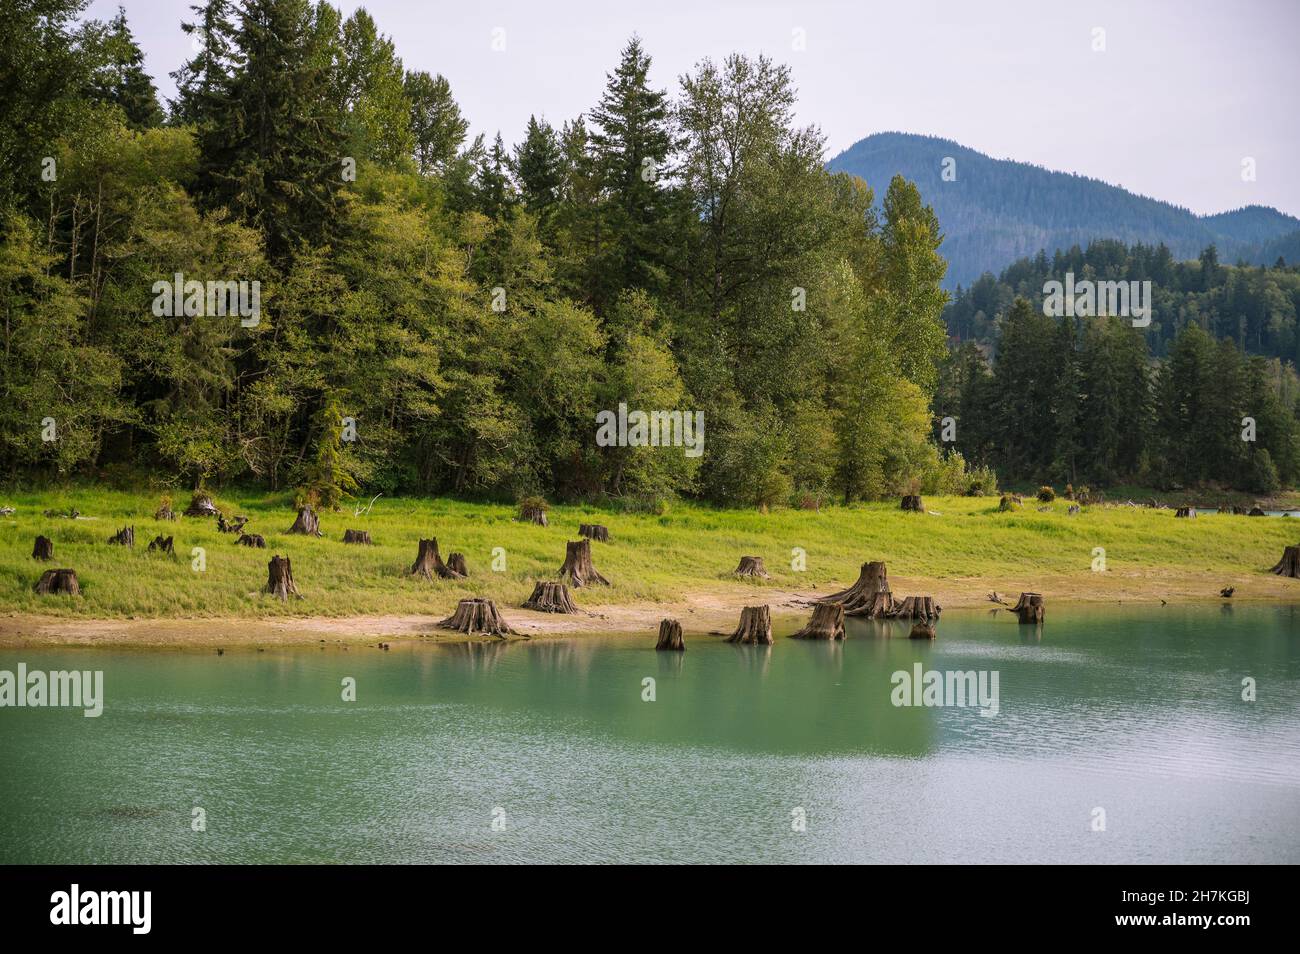 Tree stumps at the edge of a glacial colored lake Stock Photo